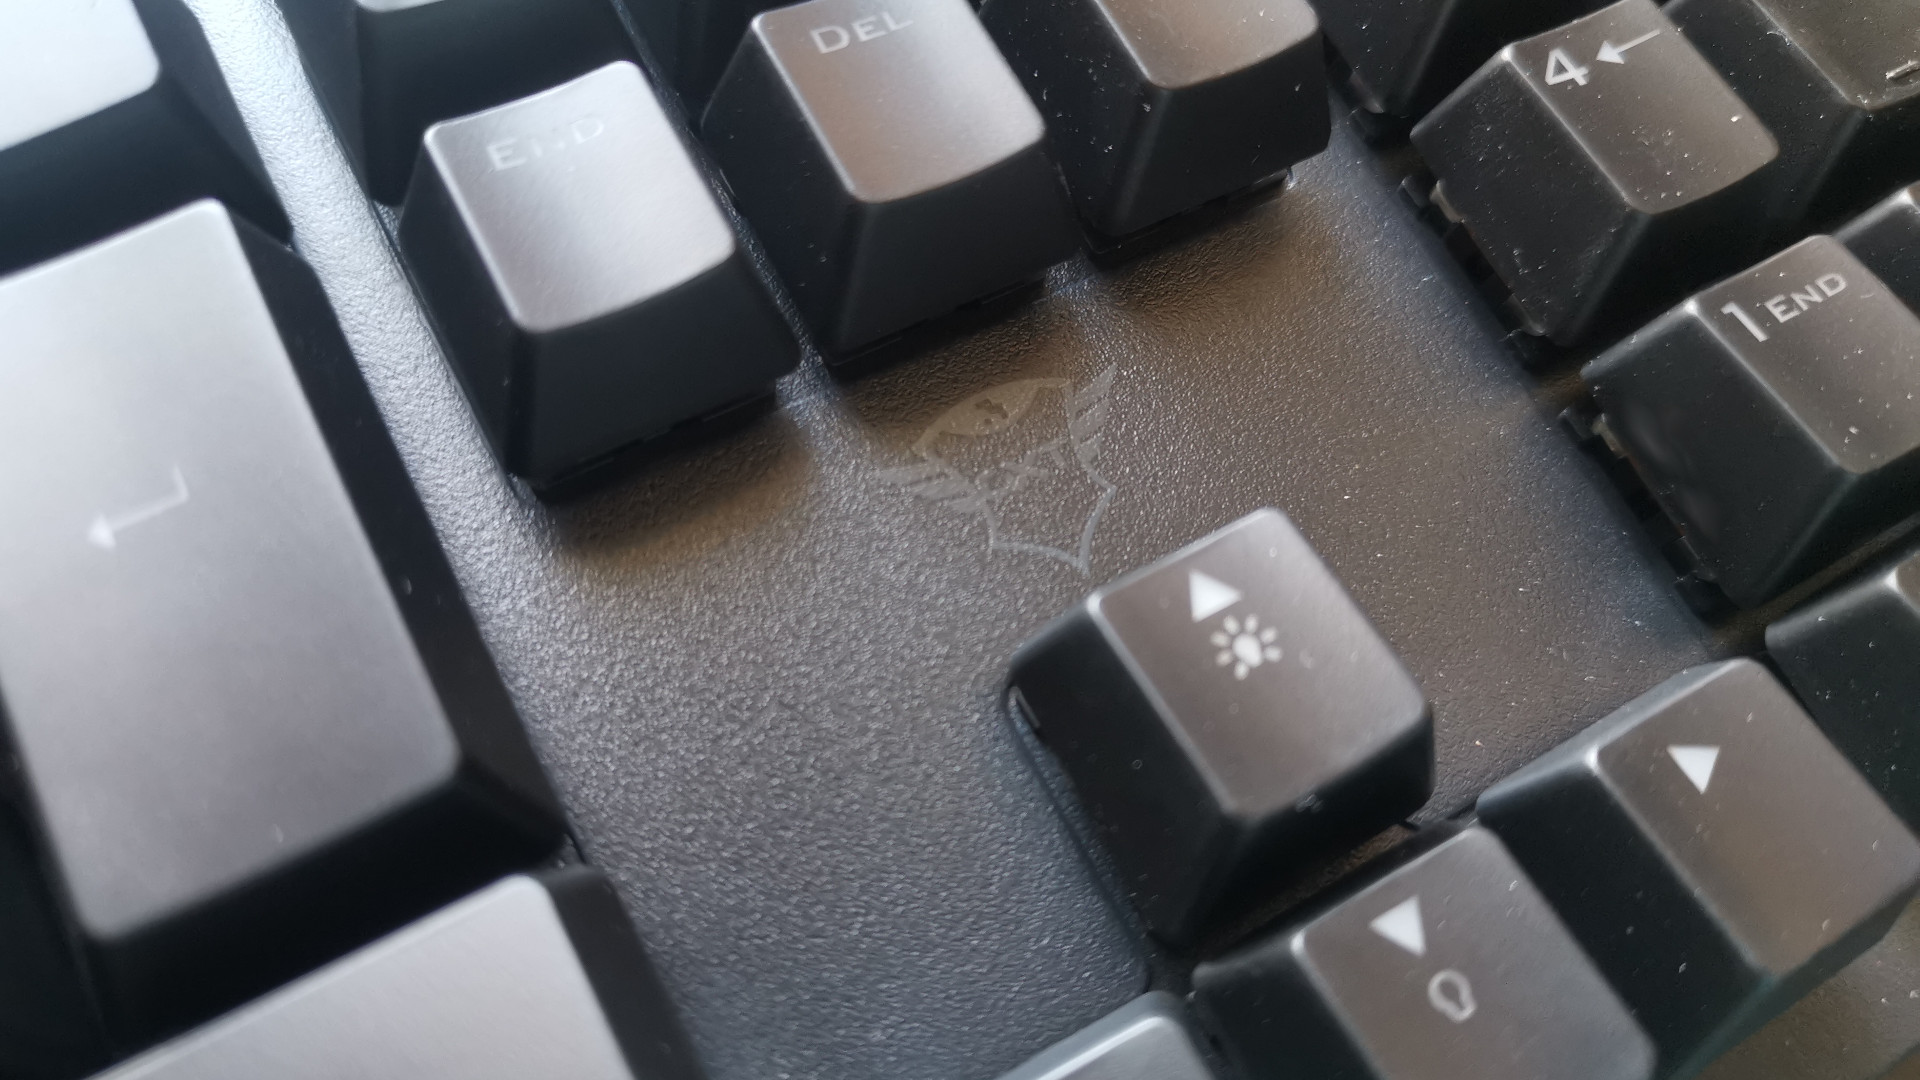 A close-up of the Trust GXT 863 Mazz gaming keyboard